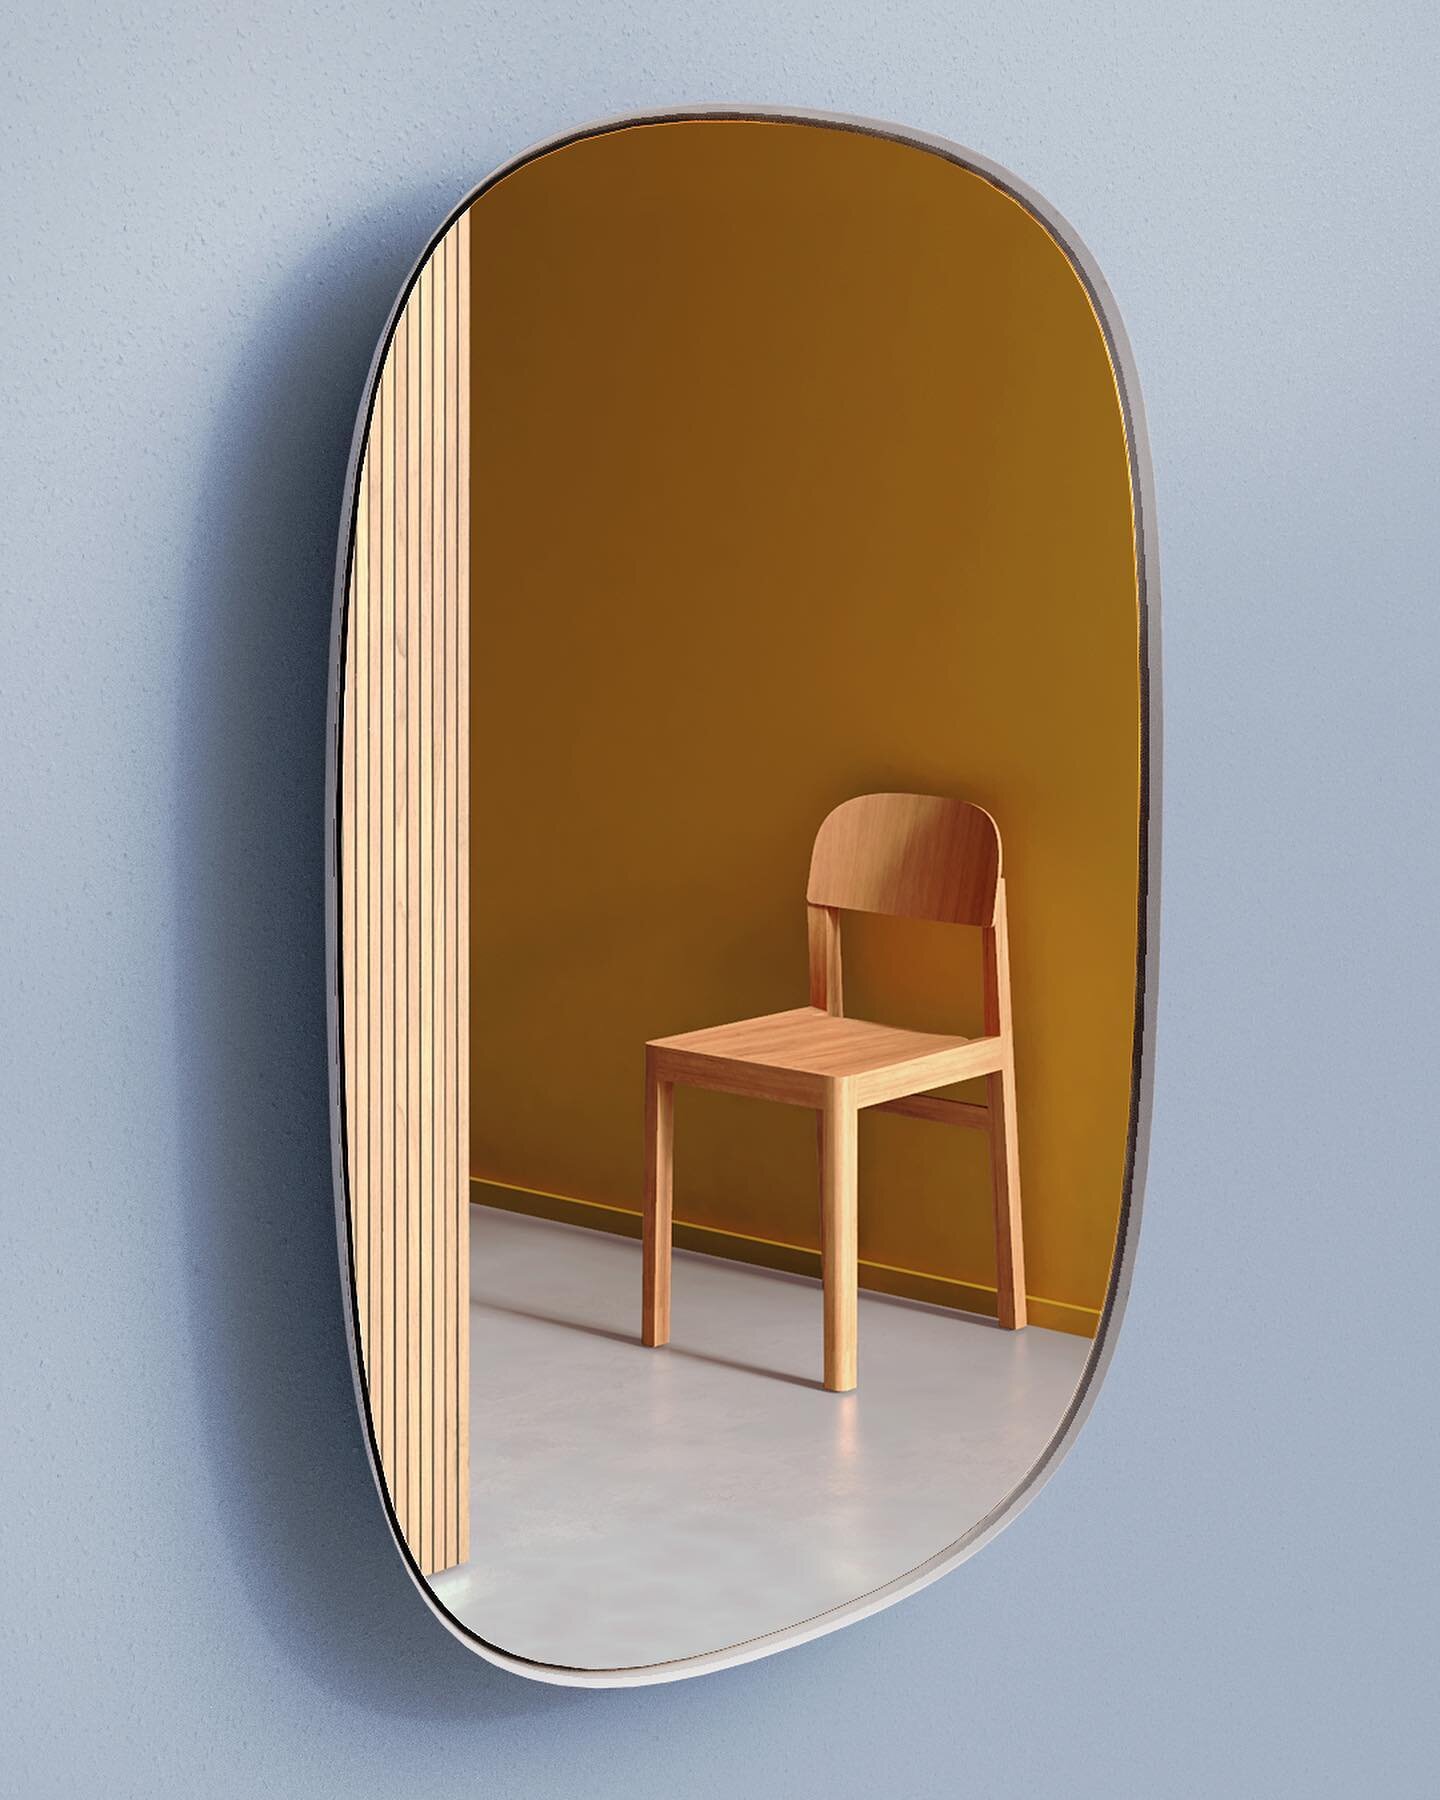 Render Studies: Muuto Framed Mirror + Workshop Chair

Documenting the exploration of rendering techniques to recreate product imagery. 

Model and reference image courtesy of Muuto.com
Design by Anderssen &amp; Voll + Cecilie Manz

#industrialdesign 